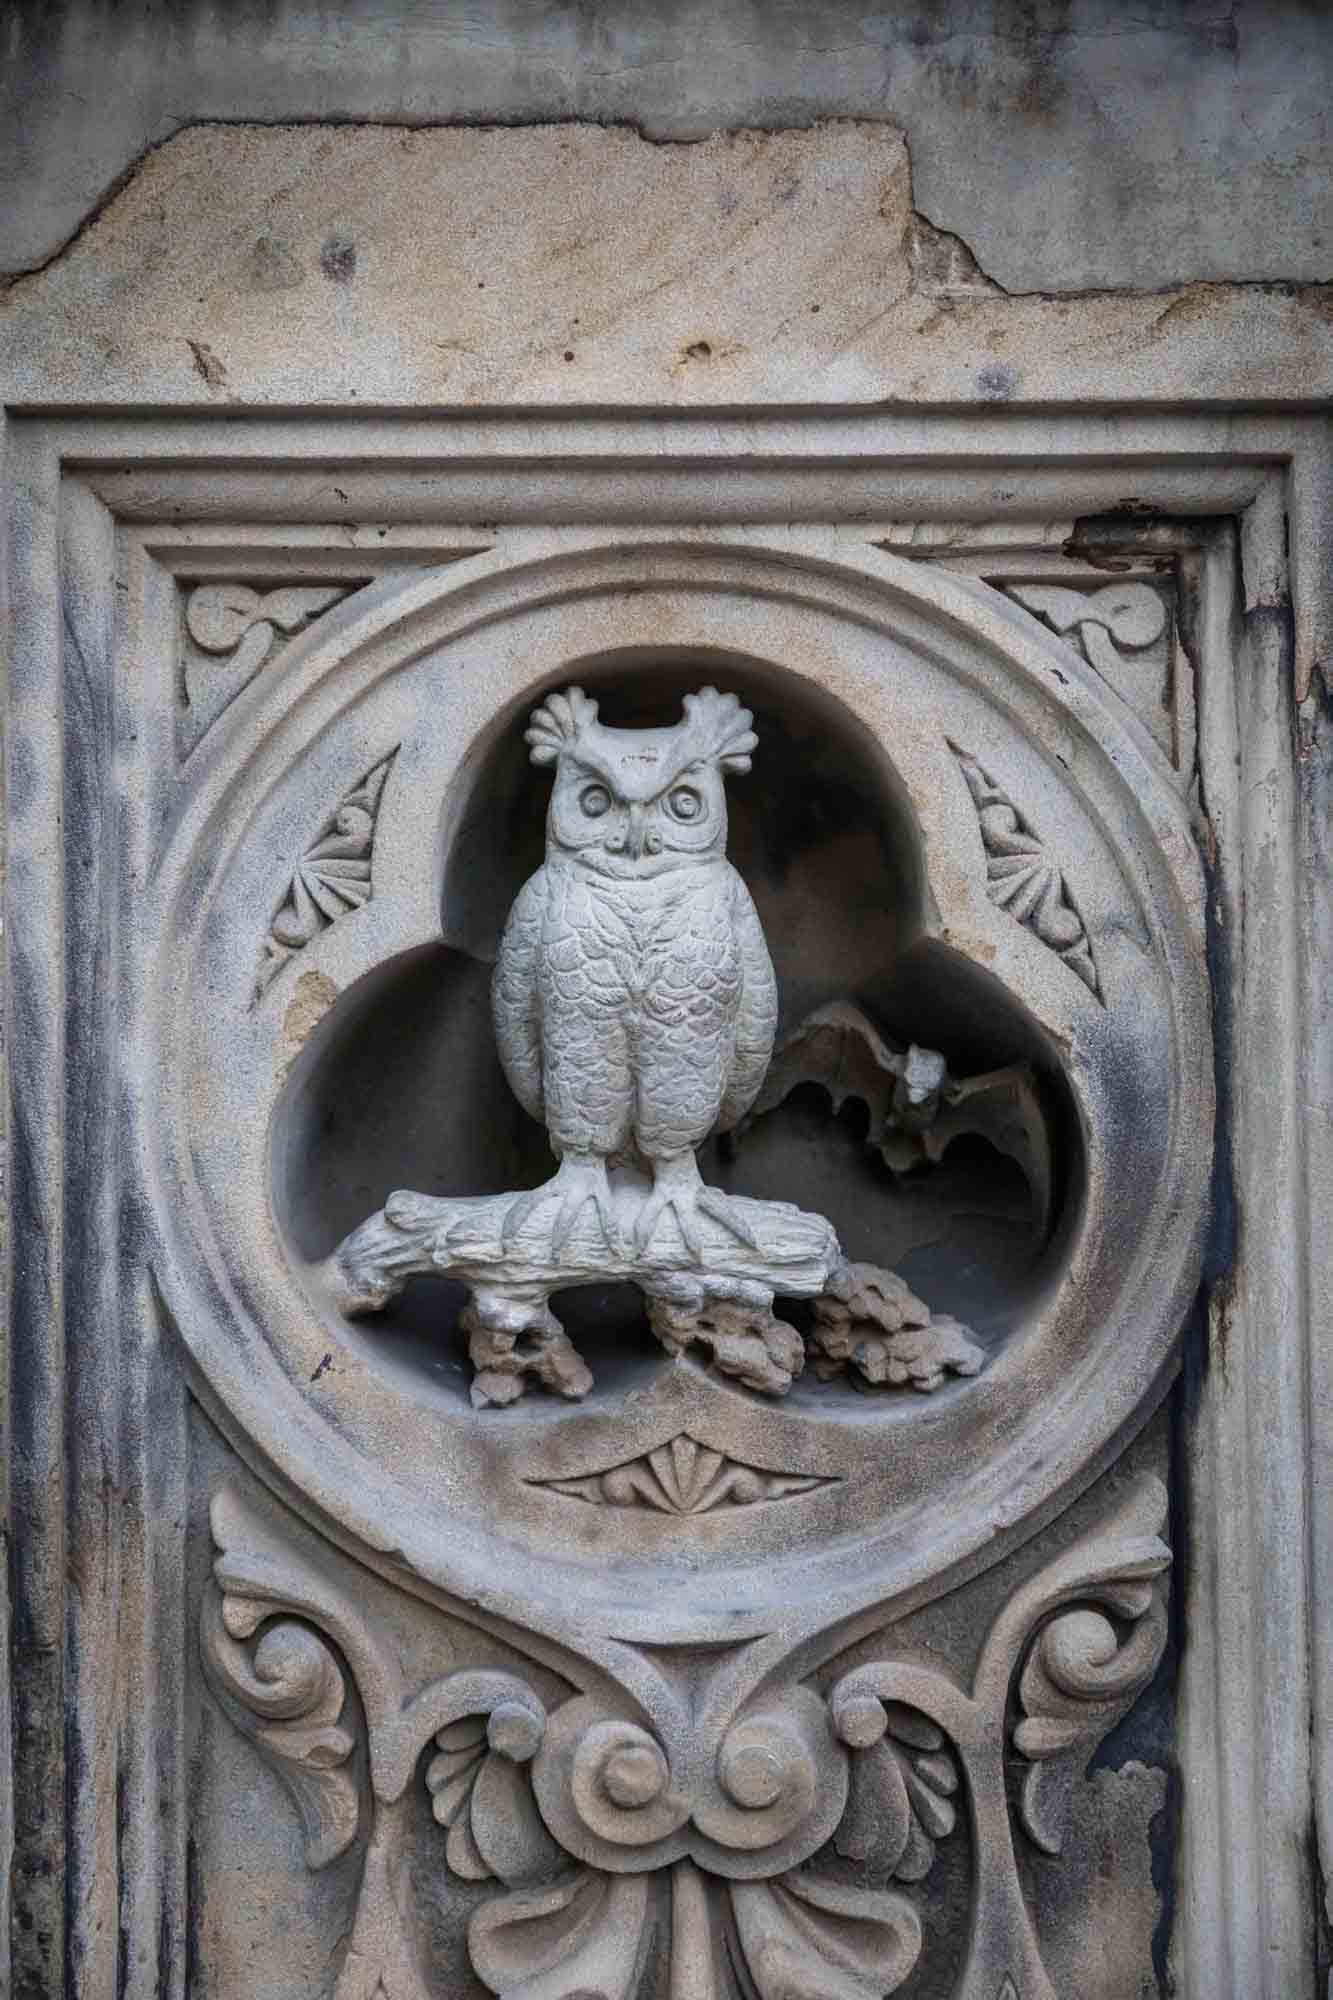 Stone carving of owl on bridge in Central Park